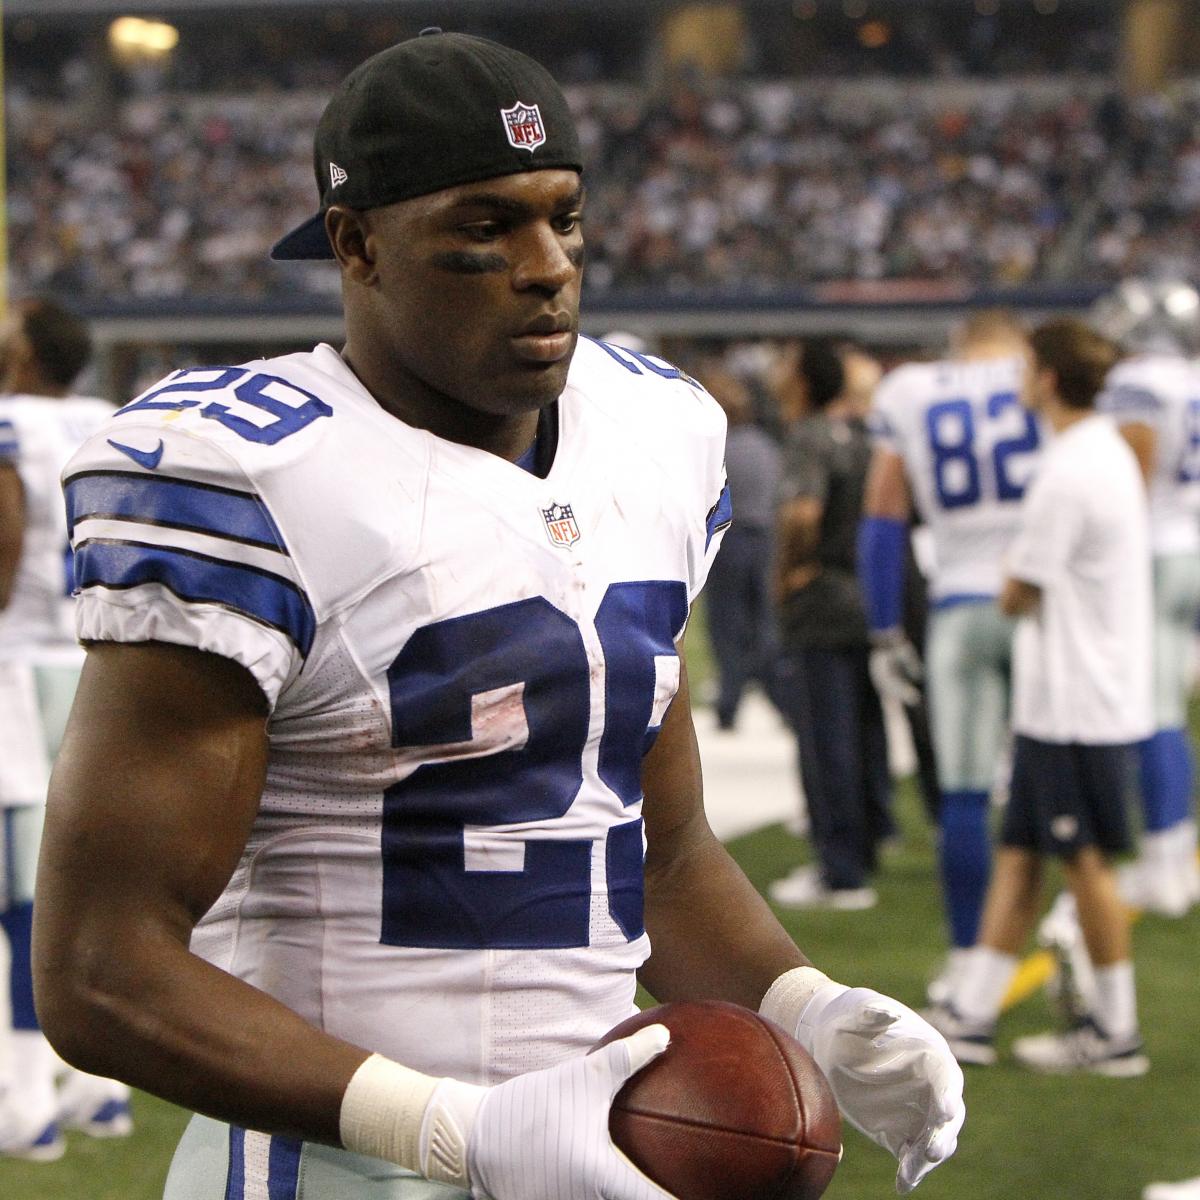 Cowboys Great Emmitt Smith Elaborates on His Message for DeMarco Murray